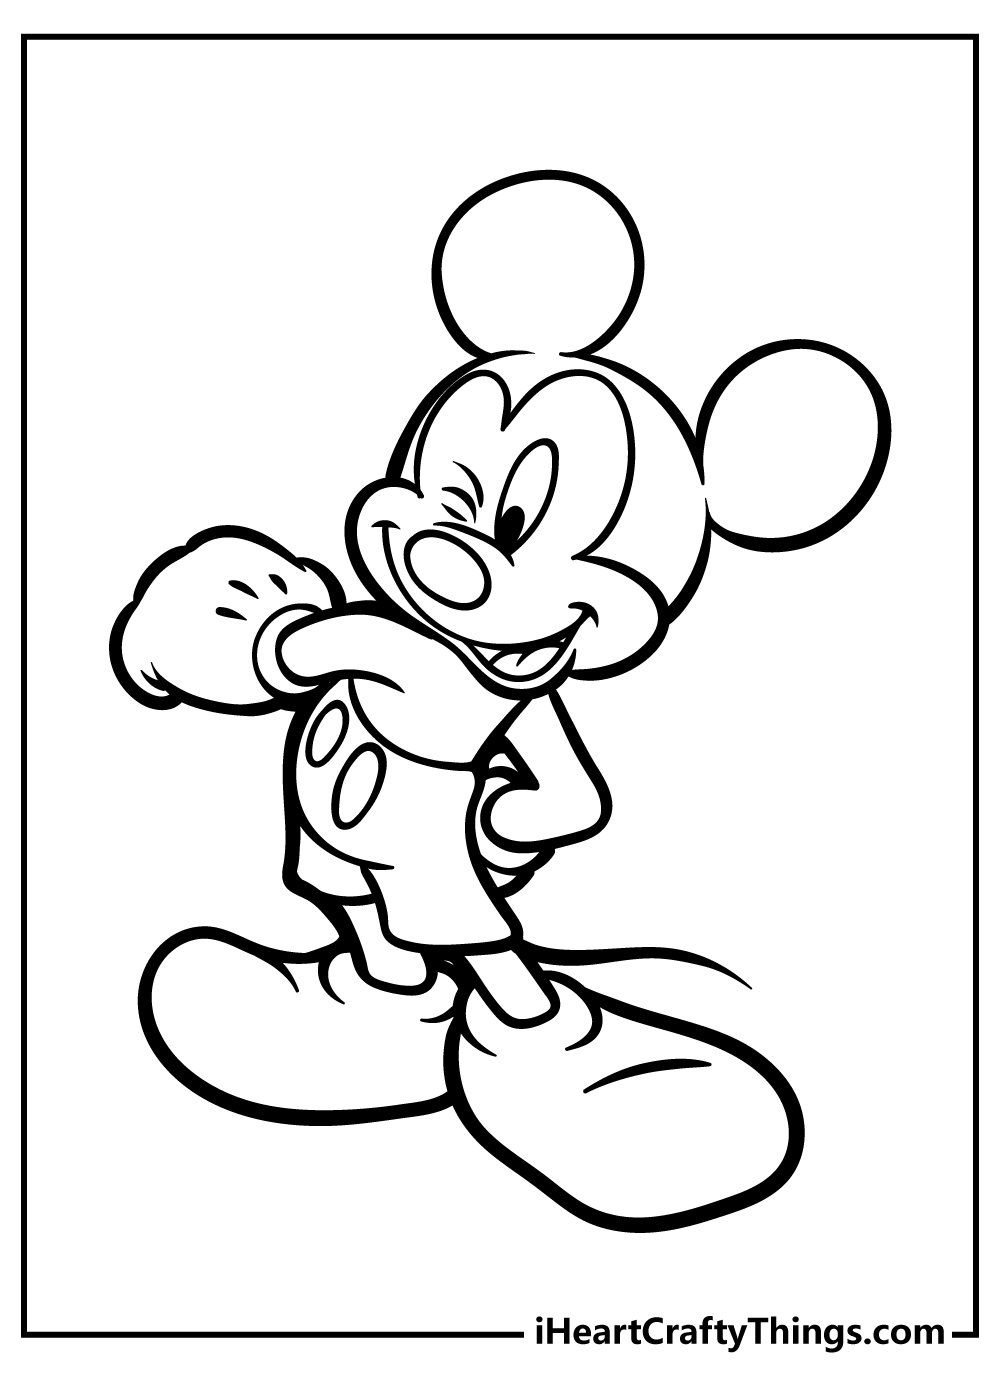 Mickey Mouse Coloring Book for kids free printable